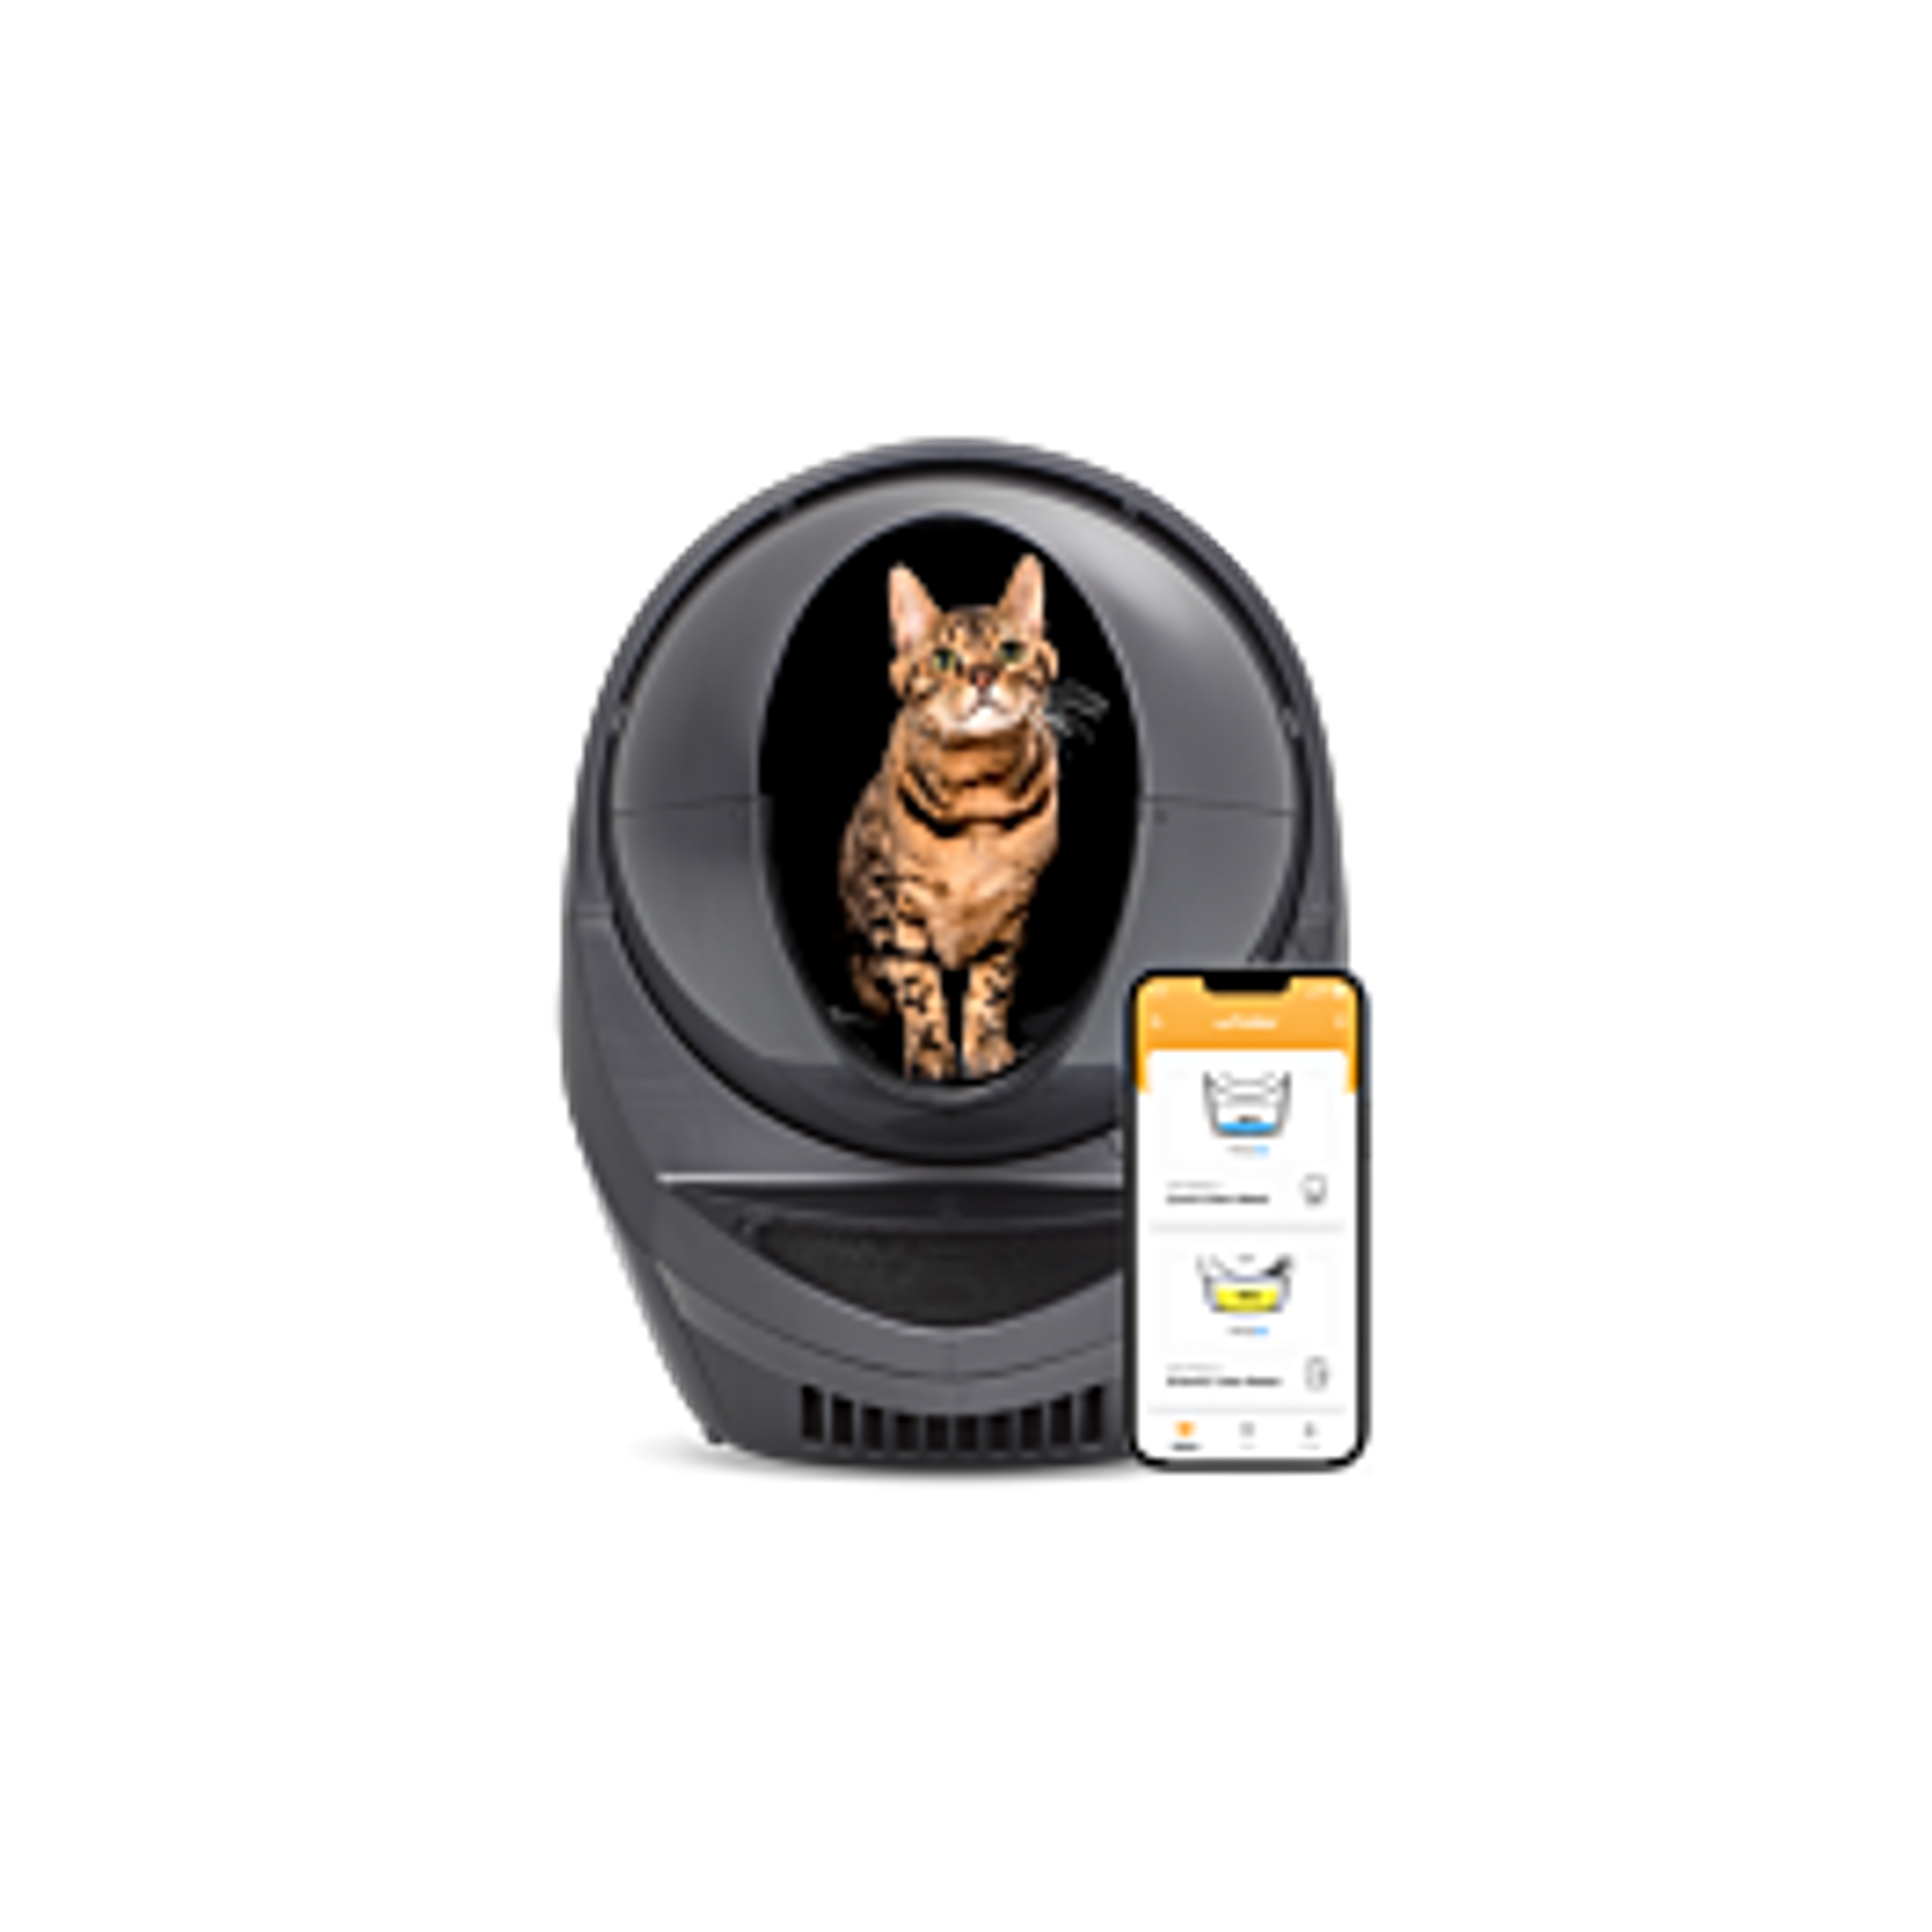 Litter-Robot 3 Connect | Self-Cleaning, WiFi-Enabled Litter Box